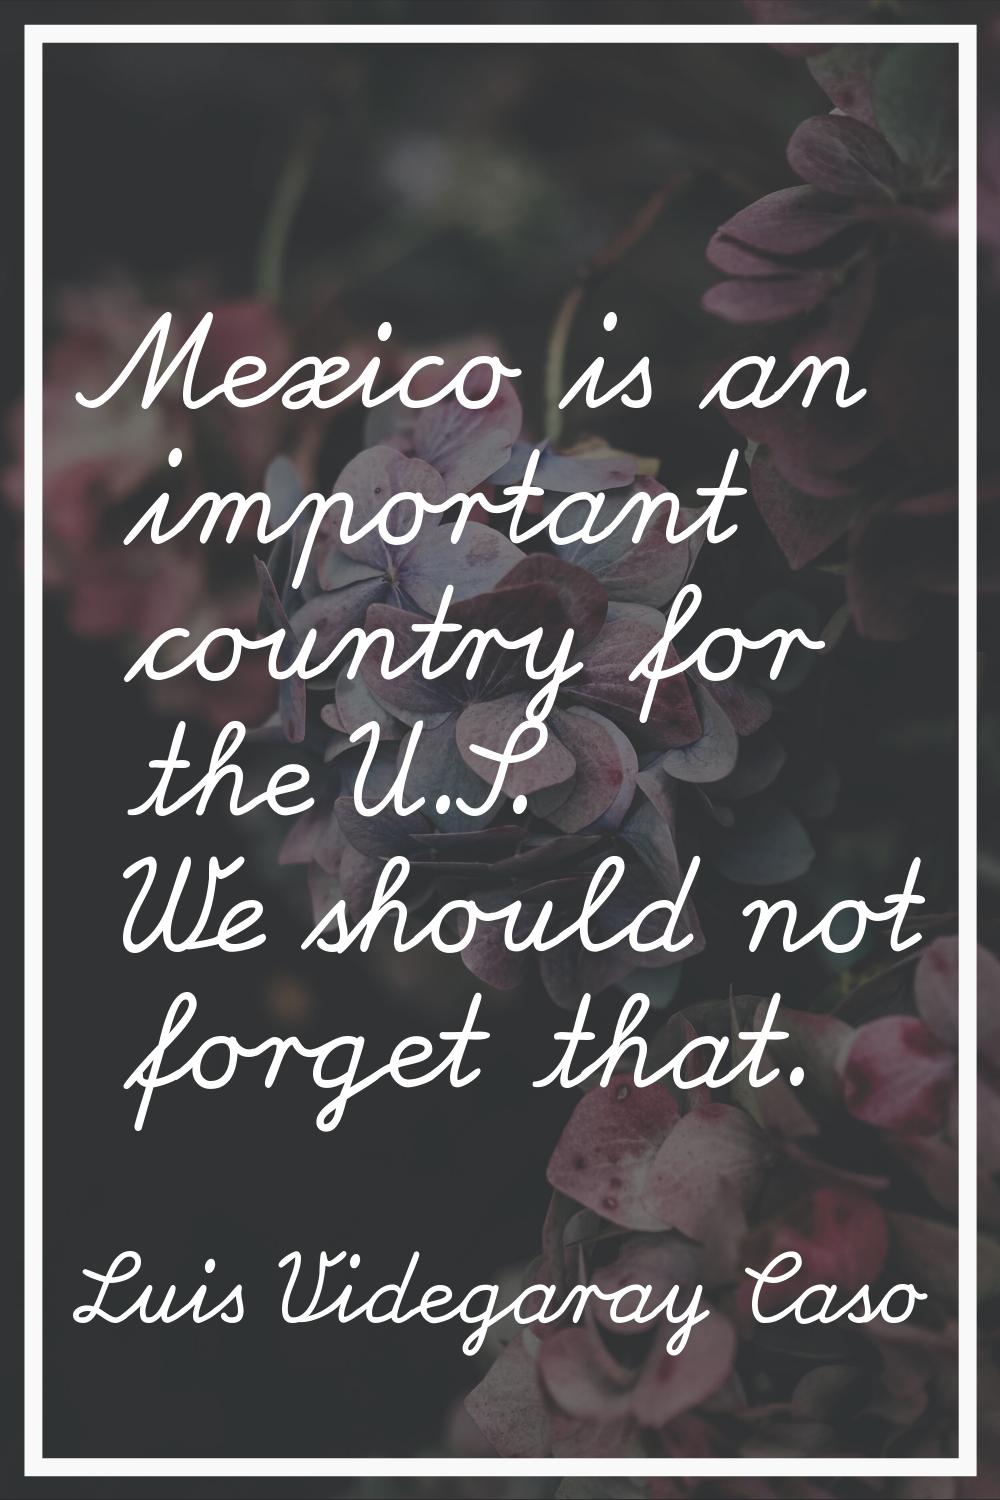 Mexico is an important country for the U.S. We should not forget that.